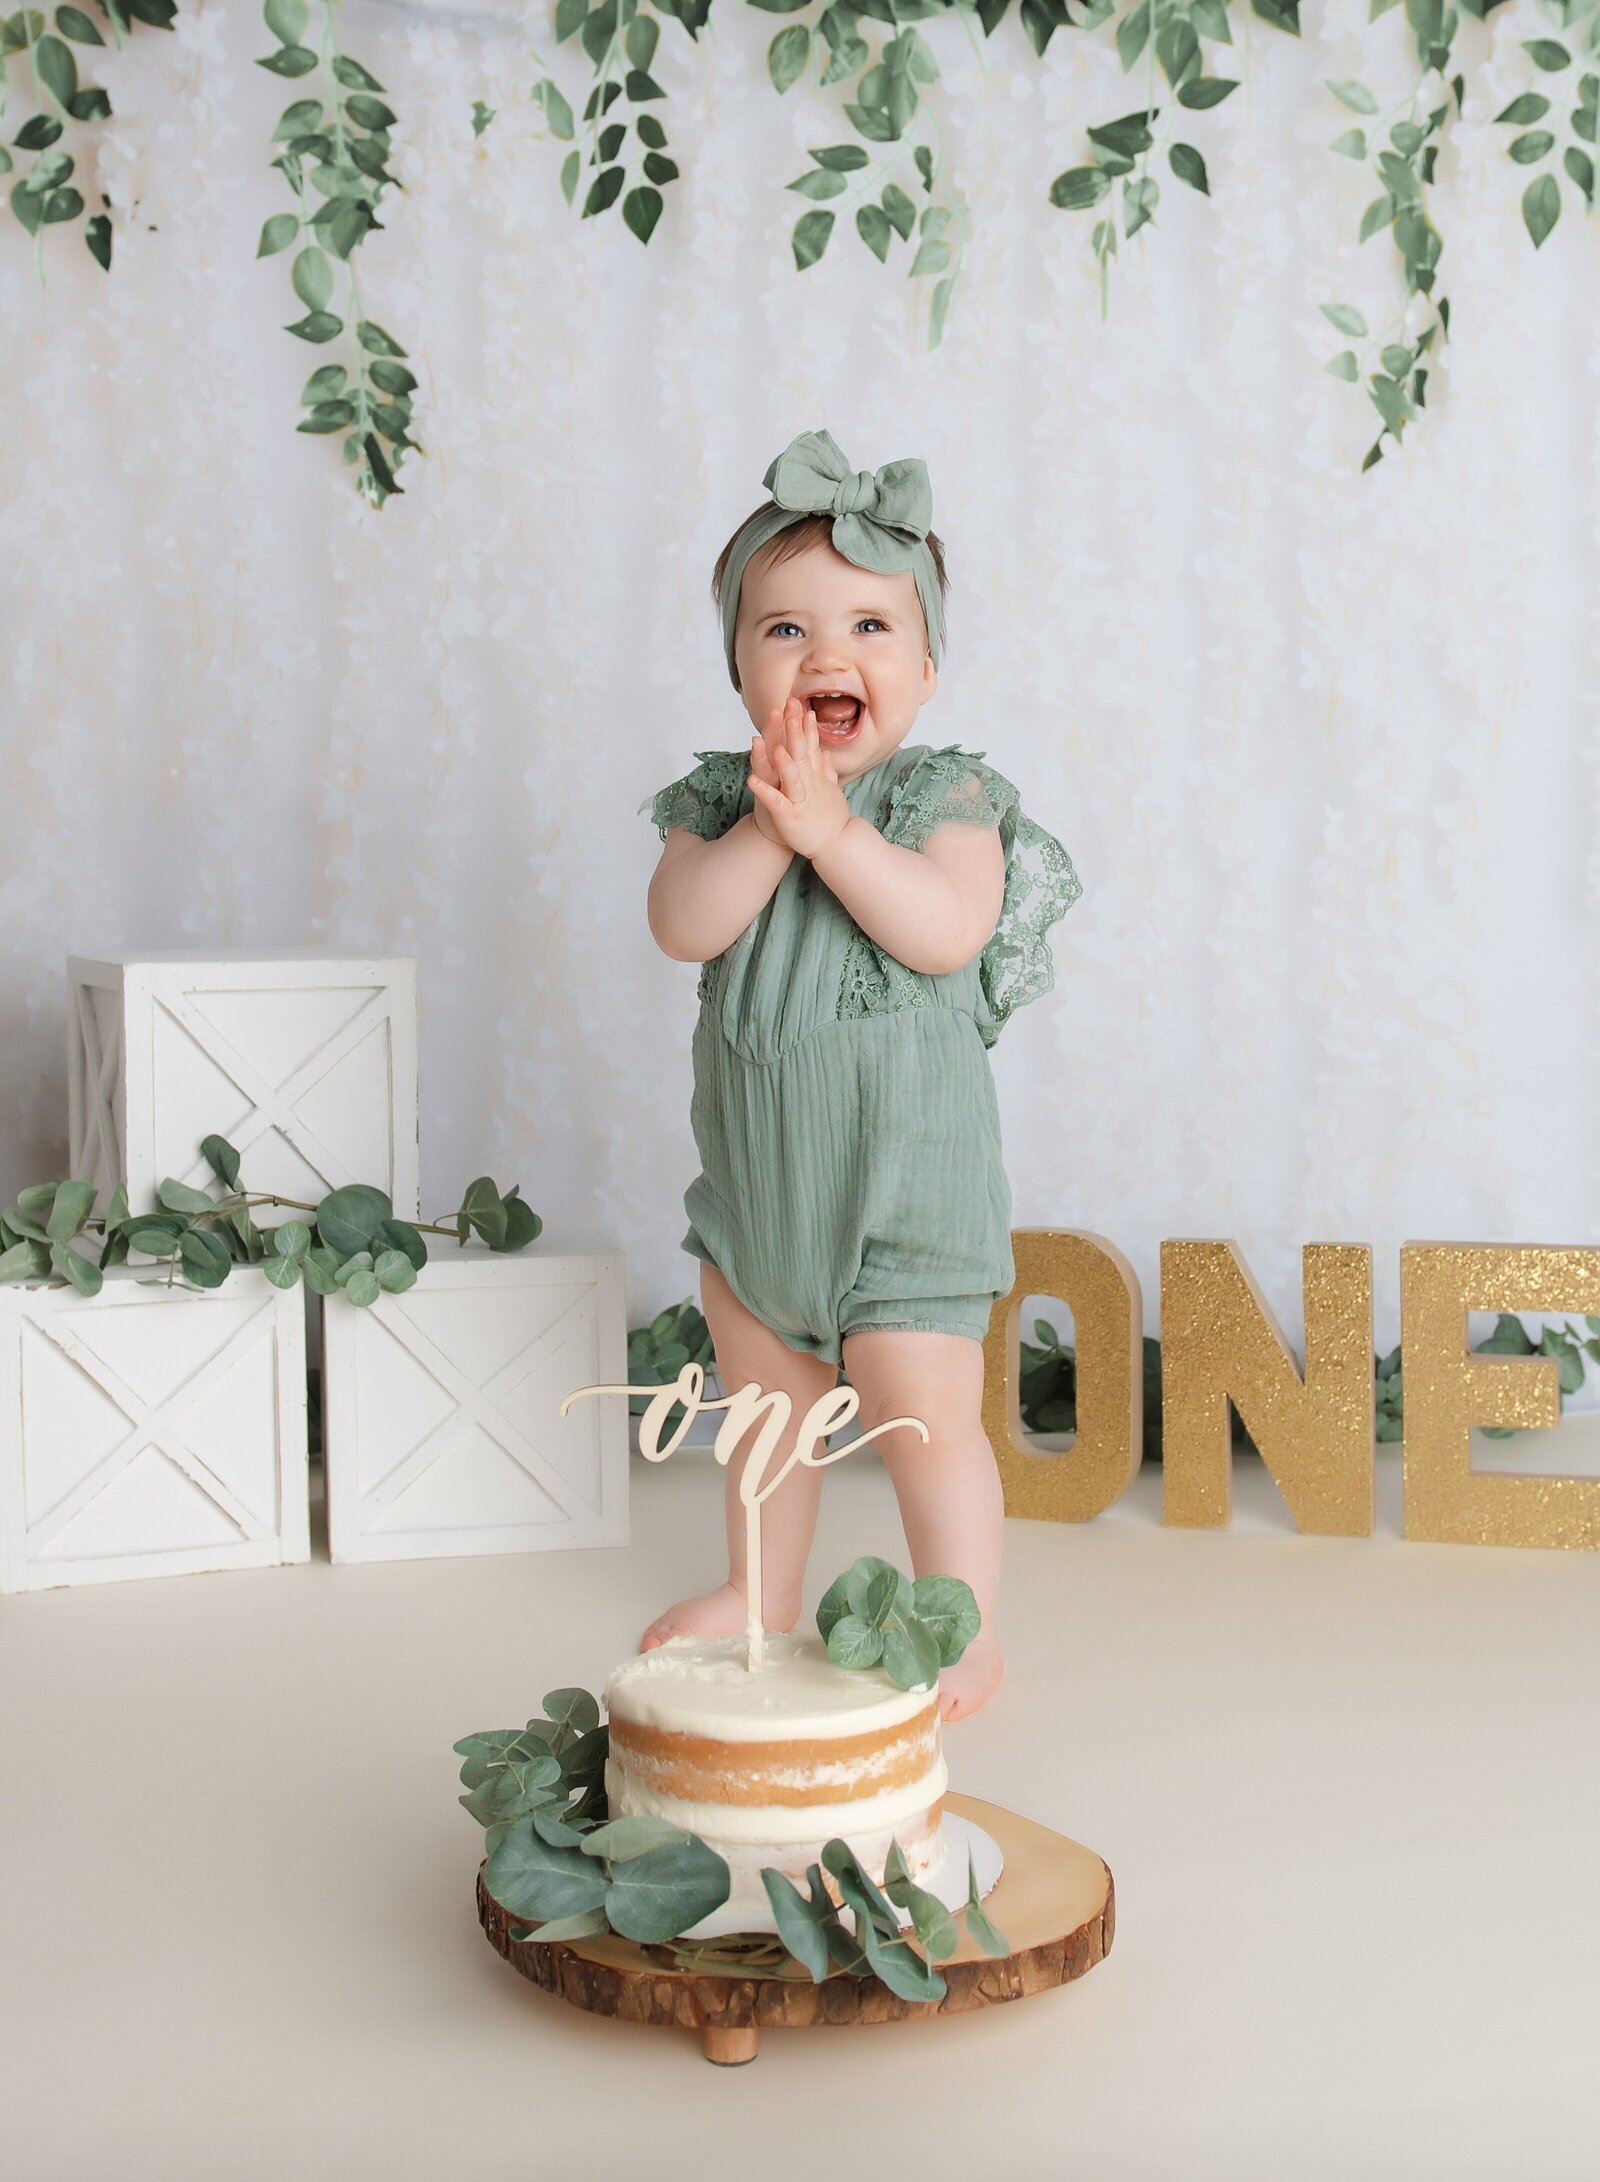 Cake smash photoshoot near me with eucalyptus set up for first birthday pictures.